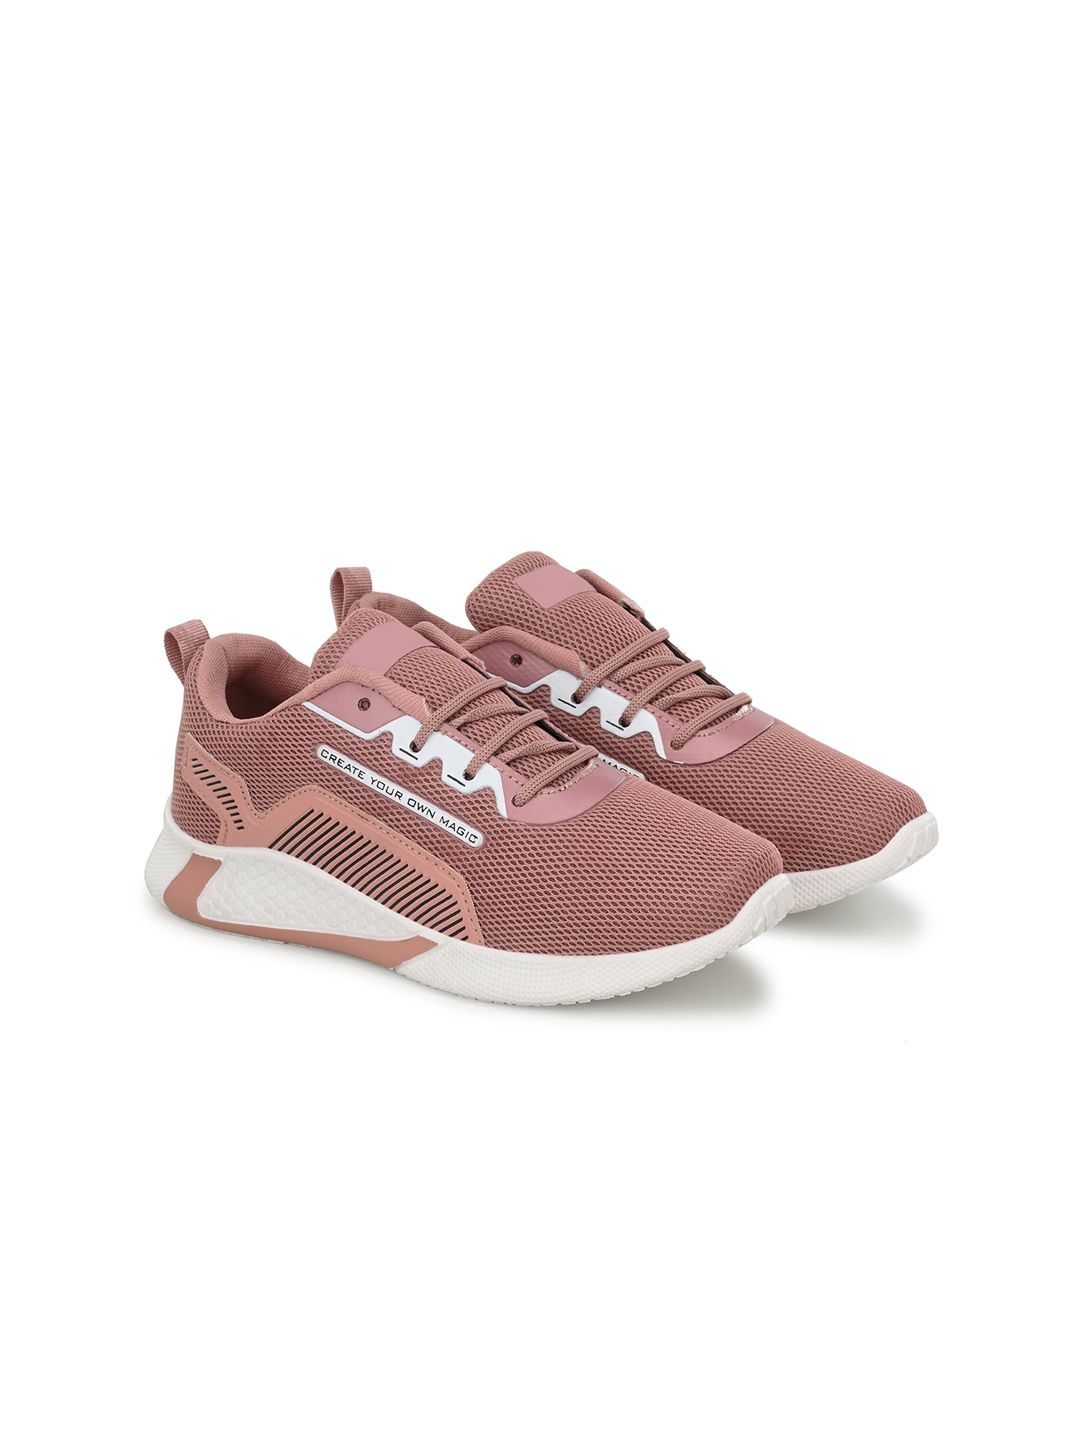 HERE&NOW Women Peach-Coloured Woven Design Sneakers Price in India